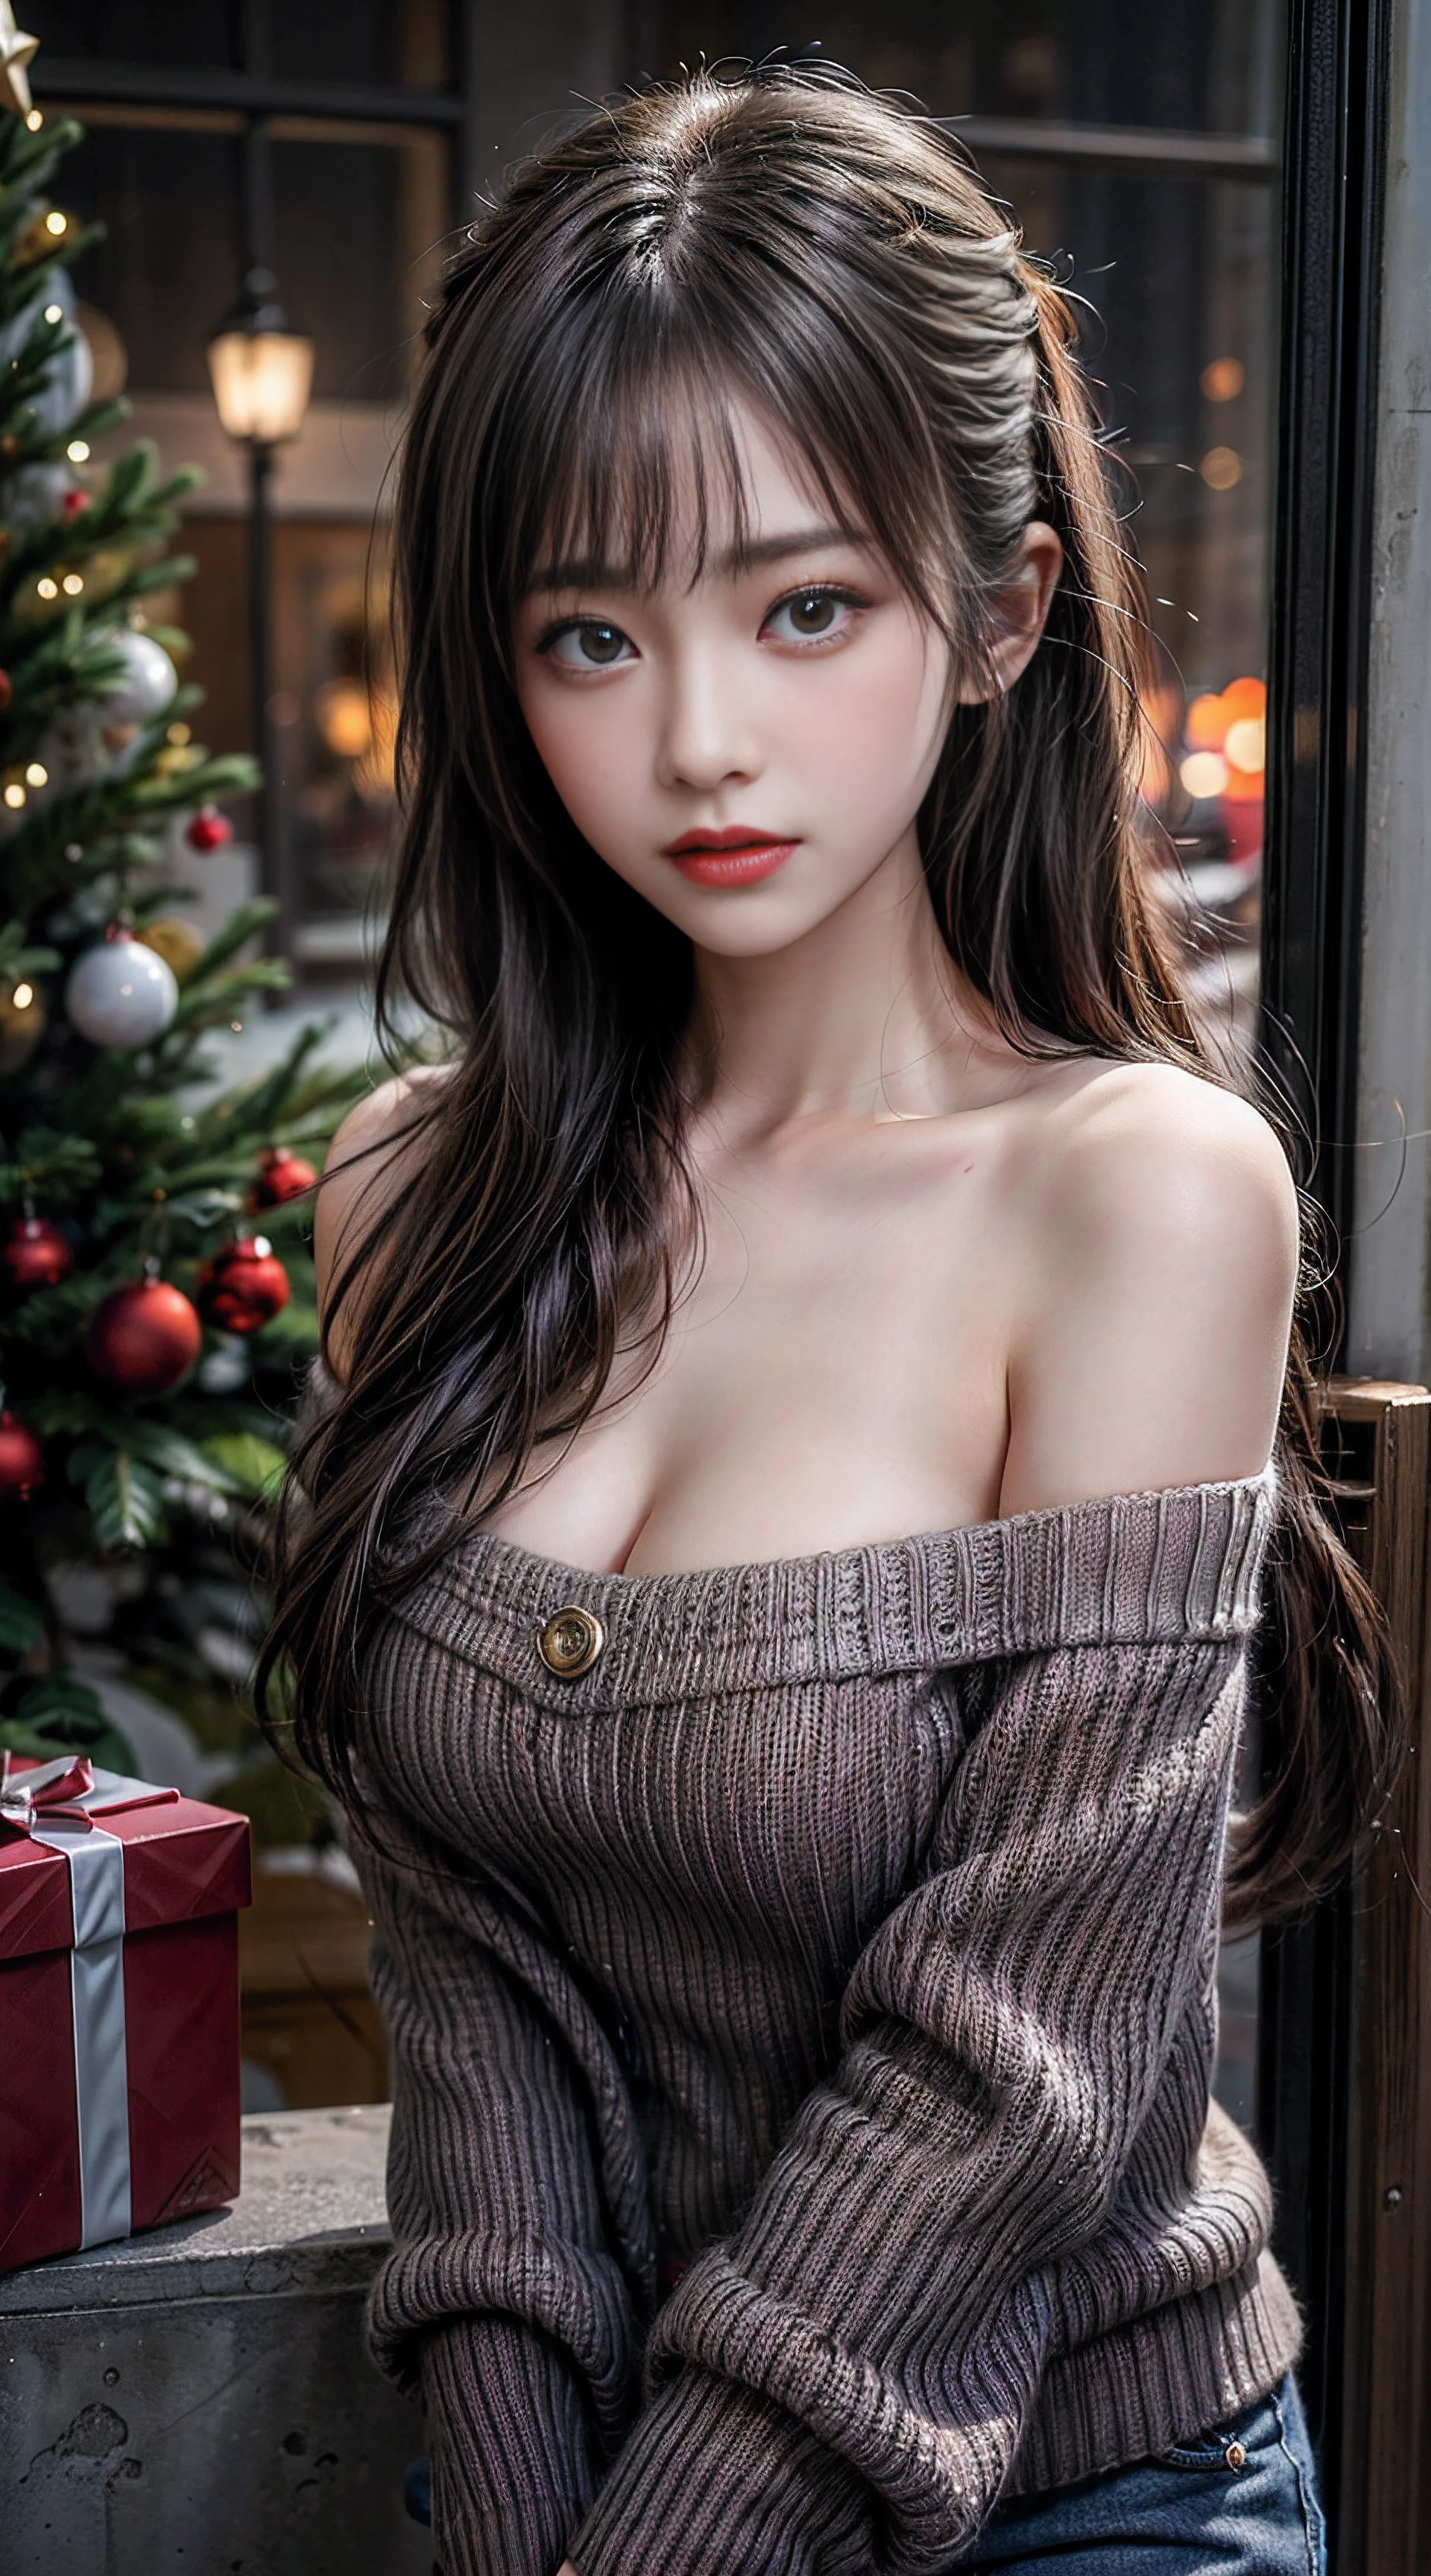 （Twin-tailed）, (1young girls), (extremely detailed beautiful face), Great look and best quality:1.4), (Ultra-detailed), (extremely detailed CG unified 8k wallpaper), Highly detailed, High-definition raw color photos, Professional Photography, Realistic portrait, Amazing face and eyes, (off-the-shoulder sweater:1.5), (cleavage:1.3), (Christmas, Christmas Ornaments, Christmas tree), Indoor, illuminations, Beautiful sunset, depth of fields, (View below:1.2),background slightly blurred,